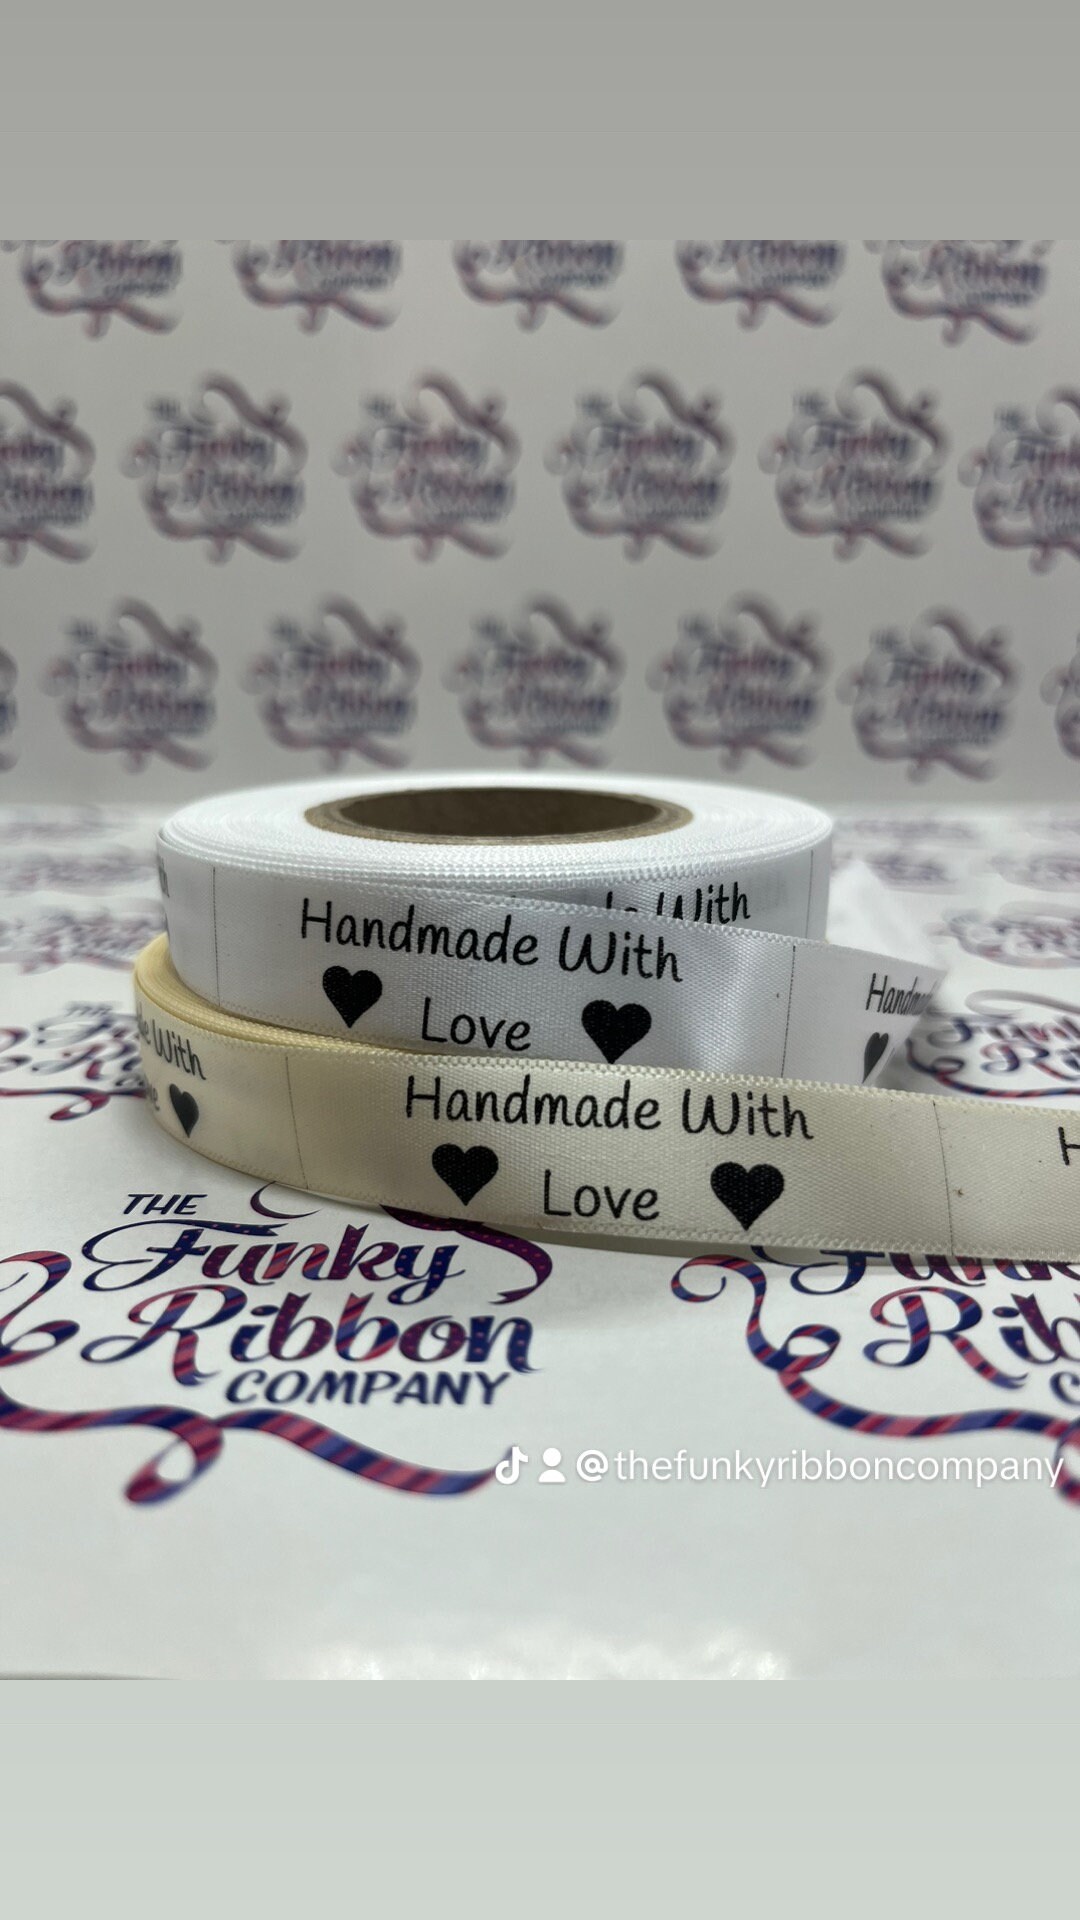 Handmade With Love Personalised Business Tags Tags for Small Handmade  Businesses Product Tags Product Labels Labels for Products 